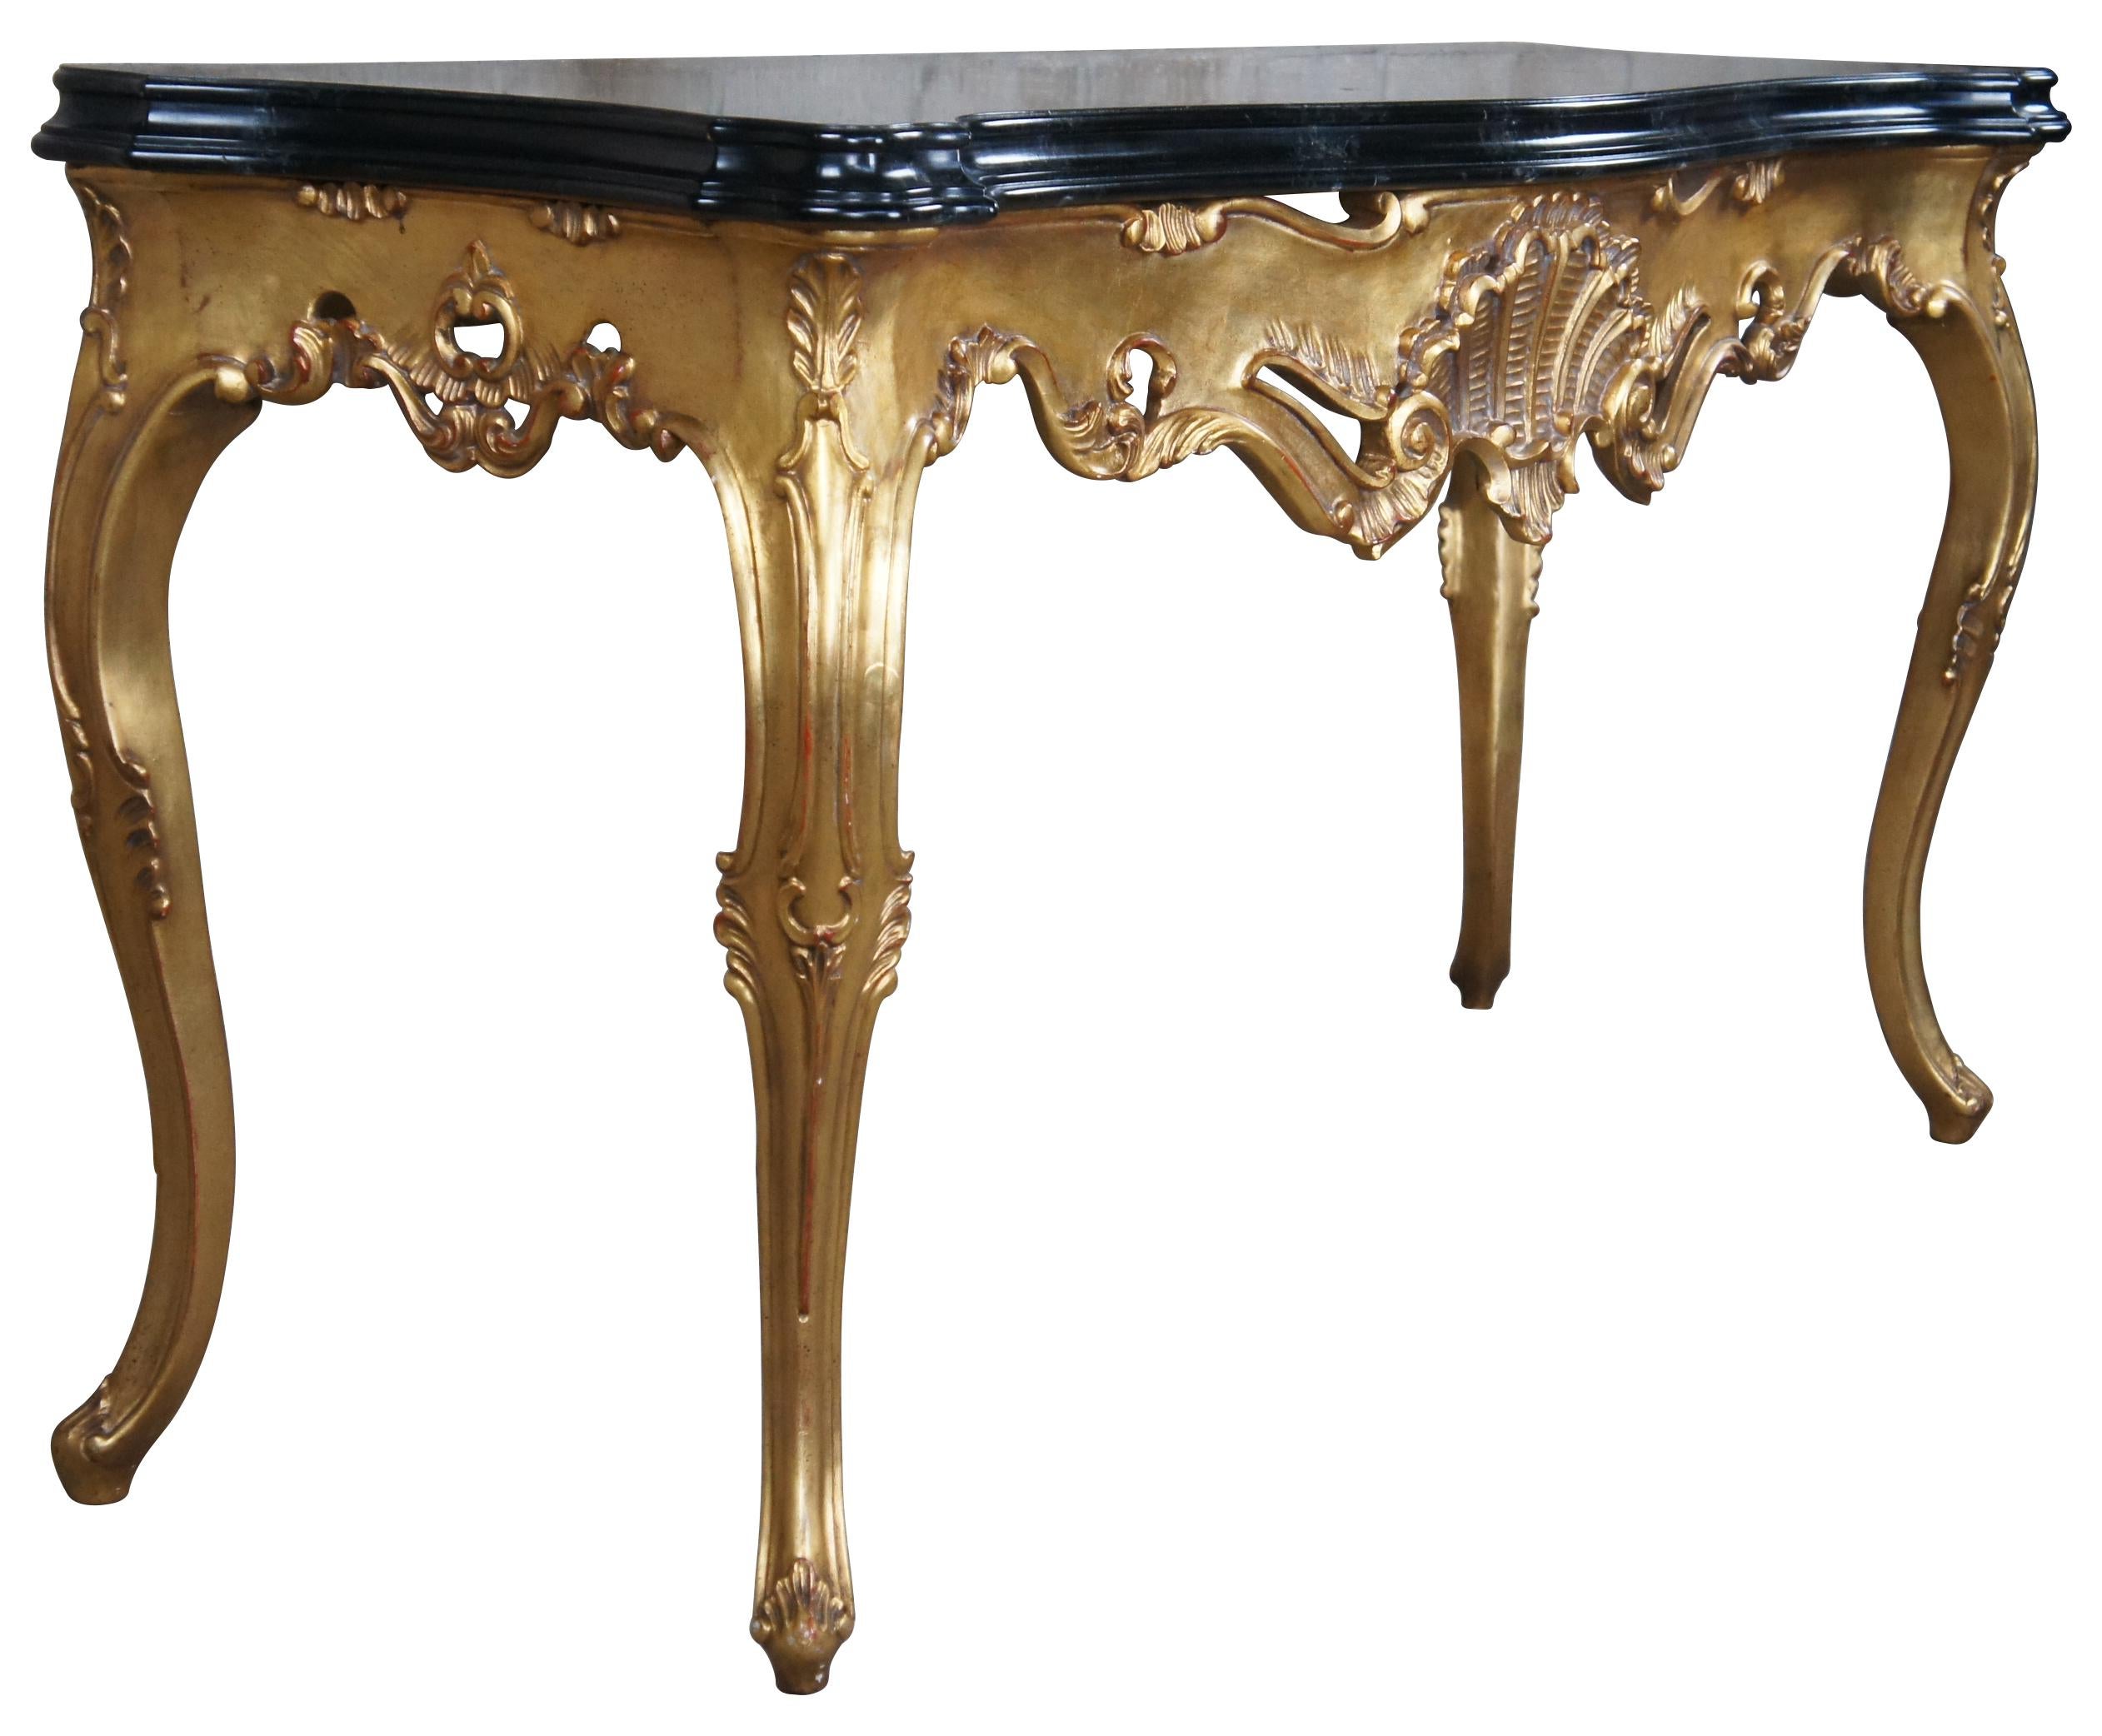 Late 20th century Rococo style console or hall table. Features a serpentine form with faux marble top, a scalloped and pierced giltwood frieze and scalloped legs with acanthus feet. Marked along back side 